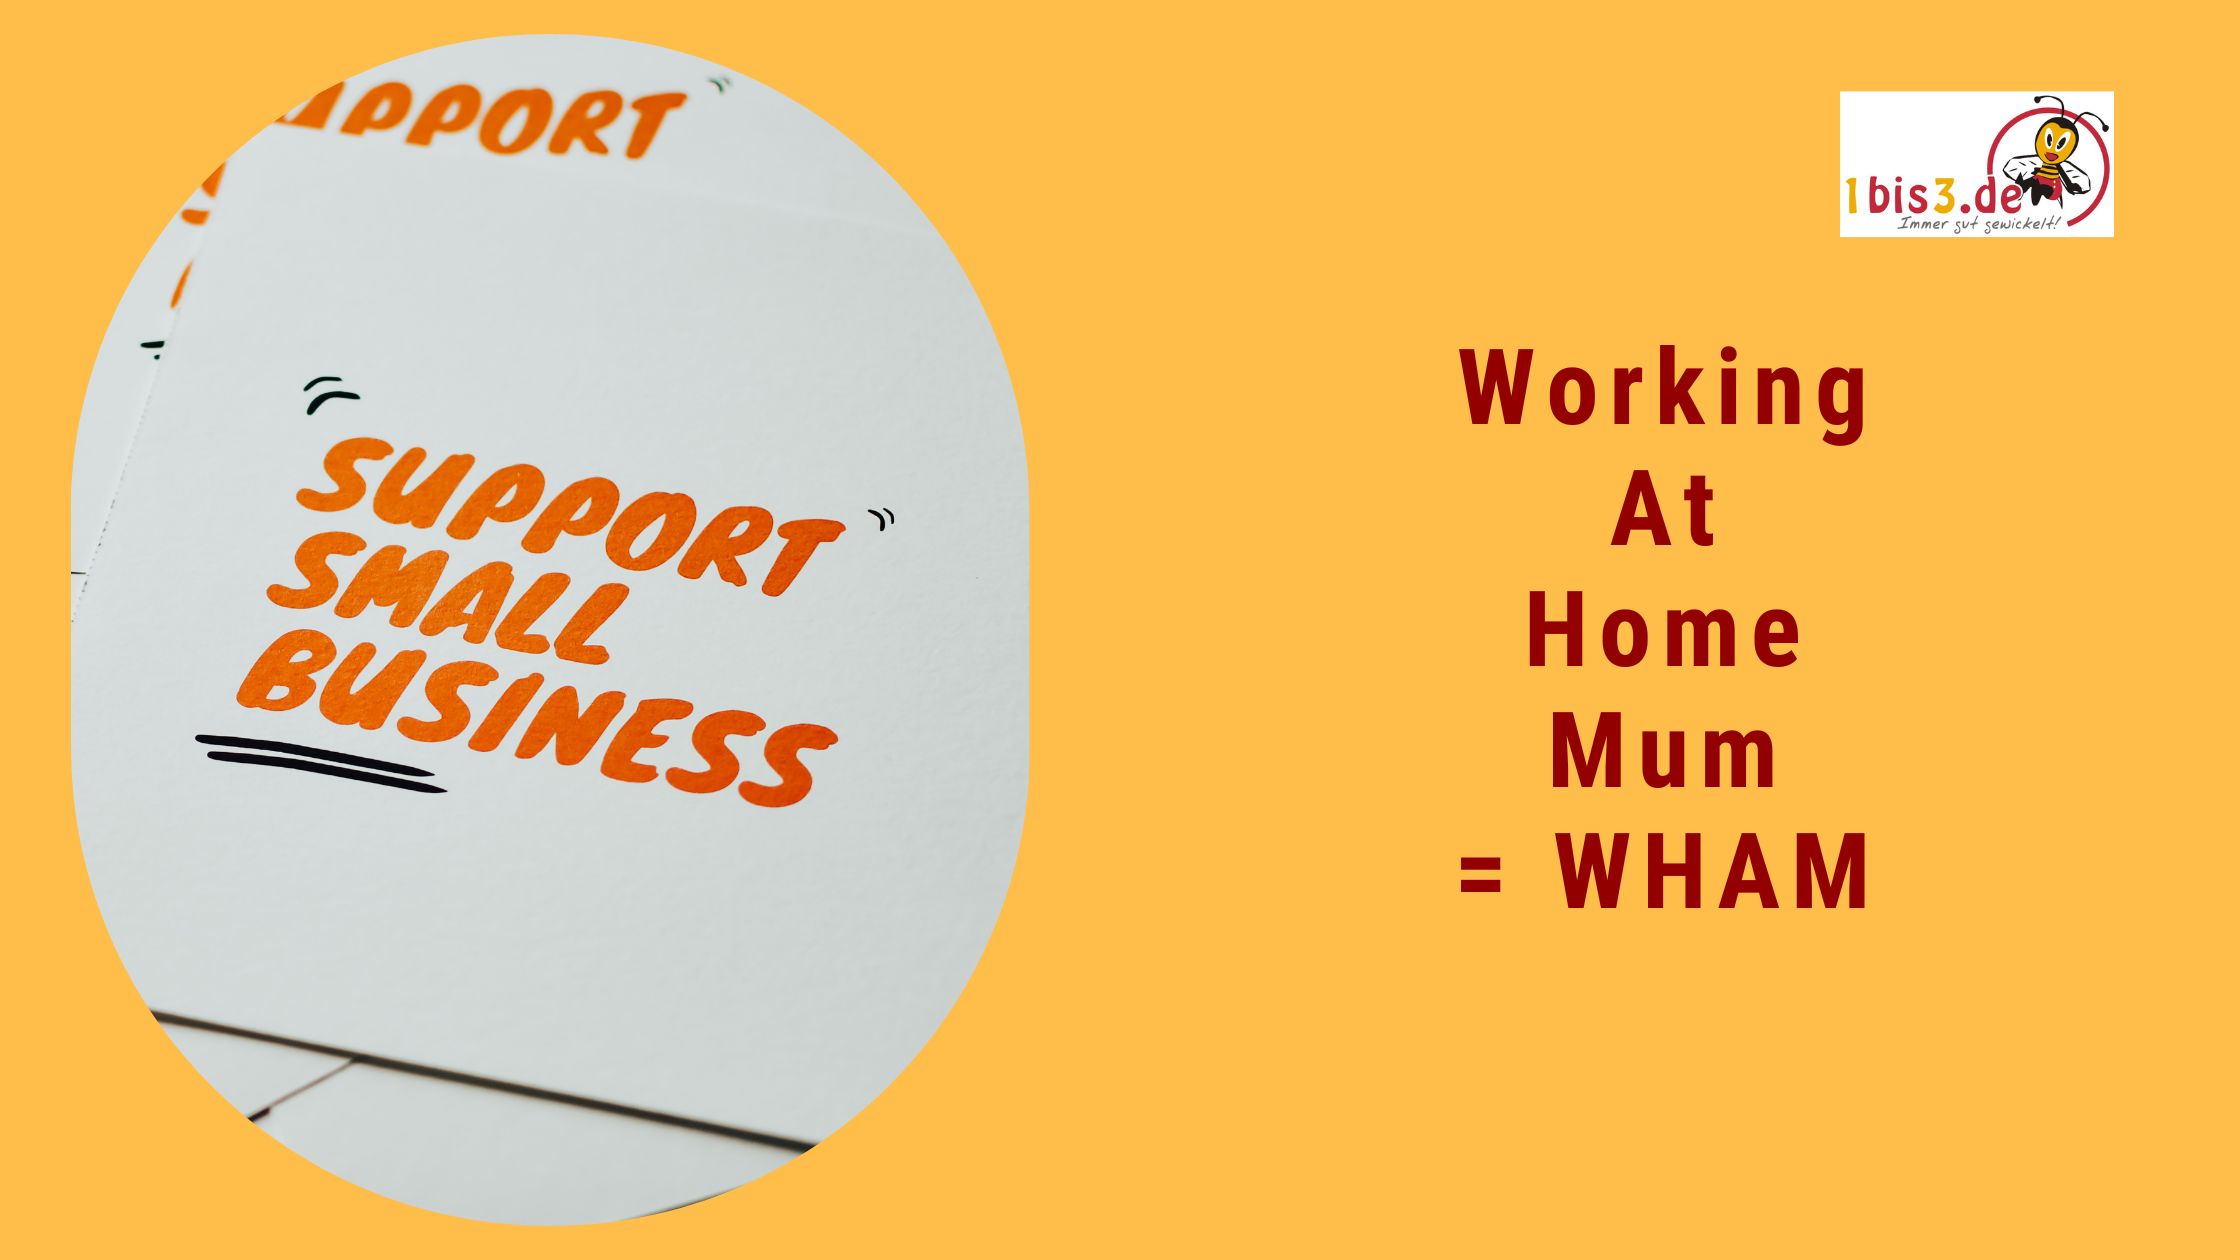 „Working at Home Mums“ (WAHMs)